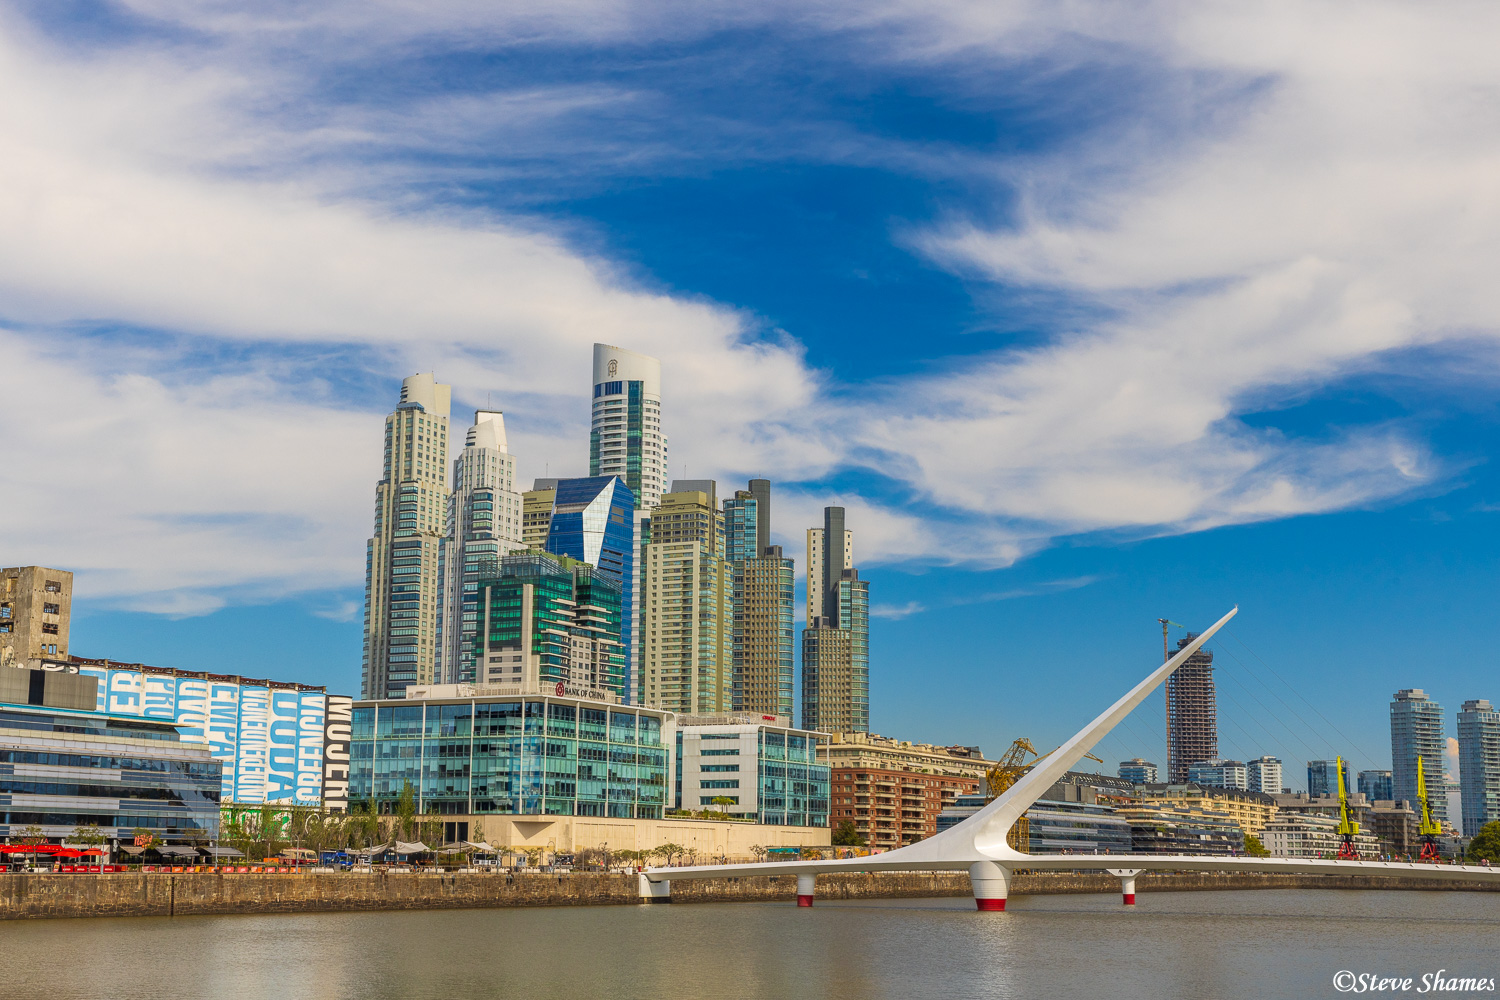 A beautiful sky and the Buenos Aires skyline with the Puente de la Mujer in front. That translates to "Woman's Bridge"